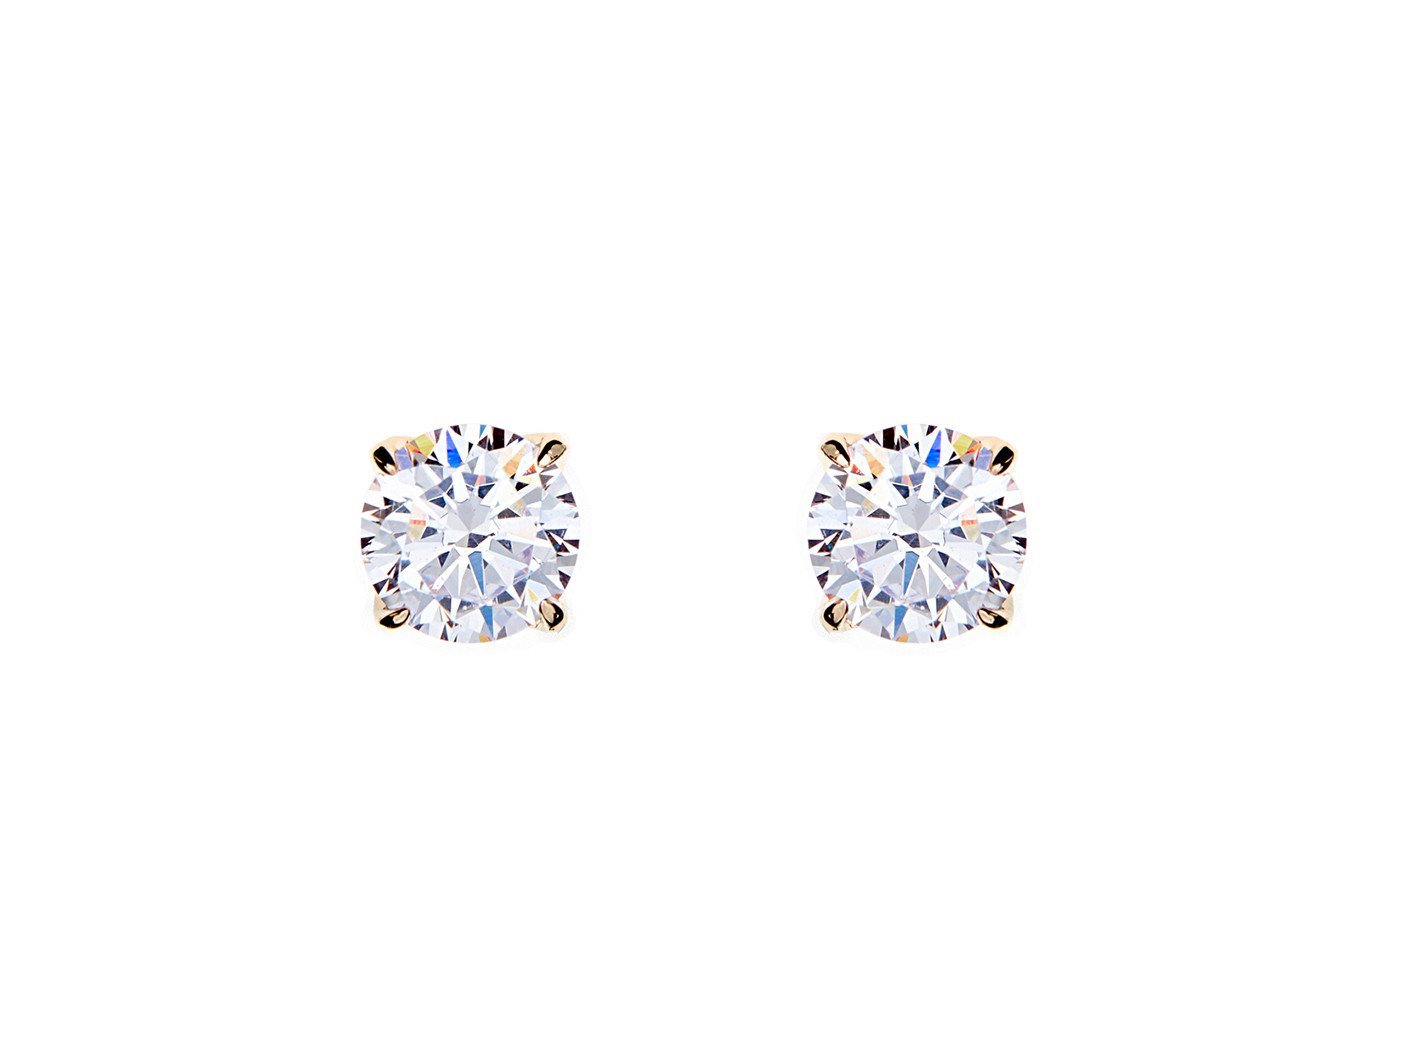 Sybella Earrings Sybella gold cubic stud